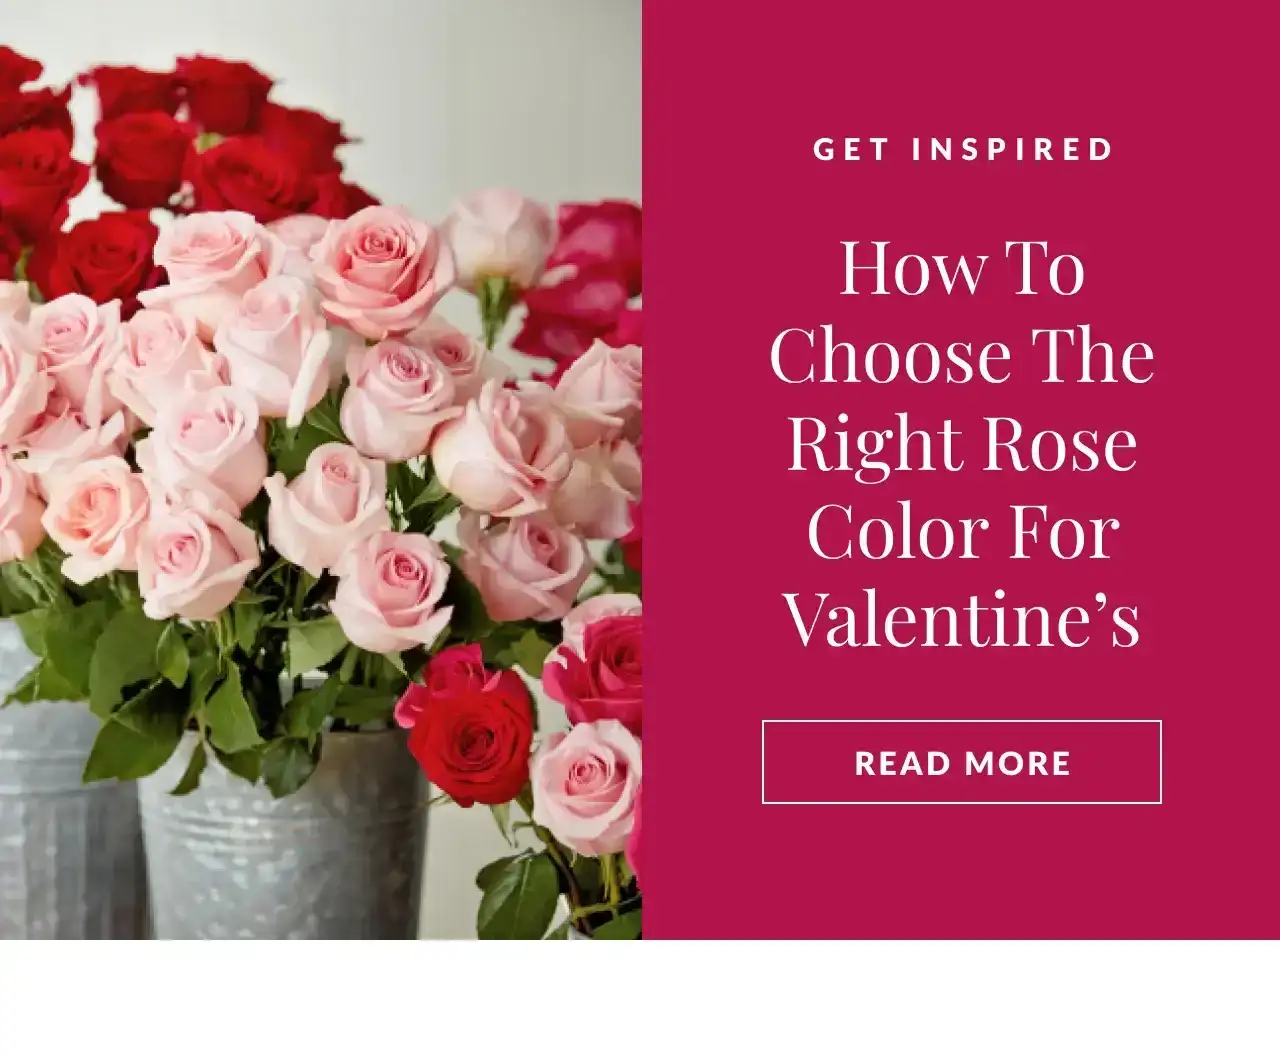 HOW TO CHOOSE THE RIGHT ROSE COLOR FOR VALENTINE'S